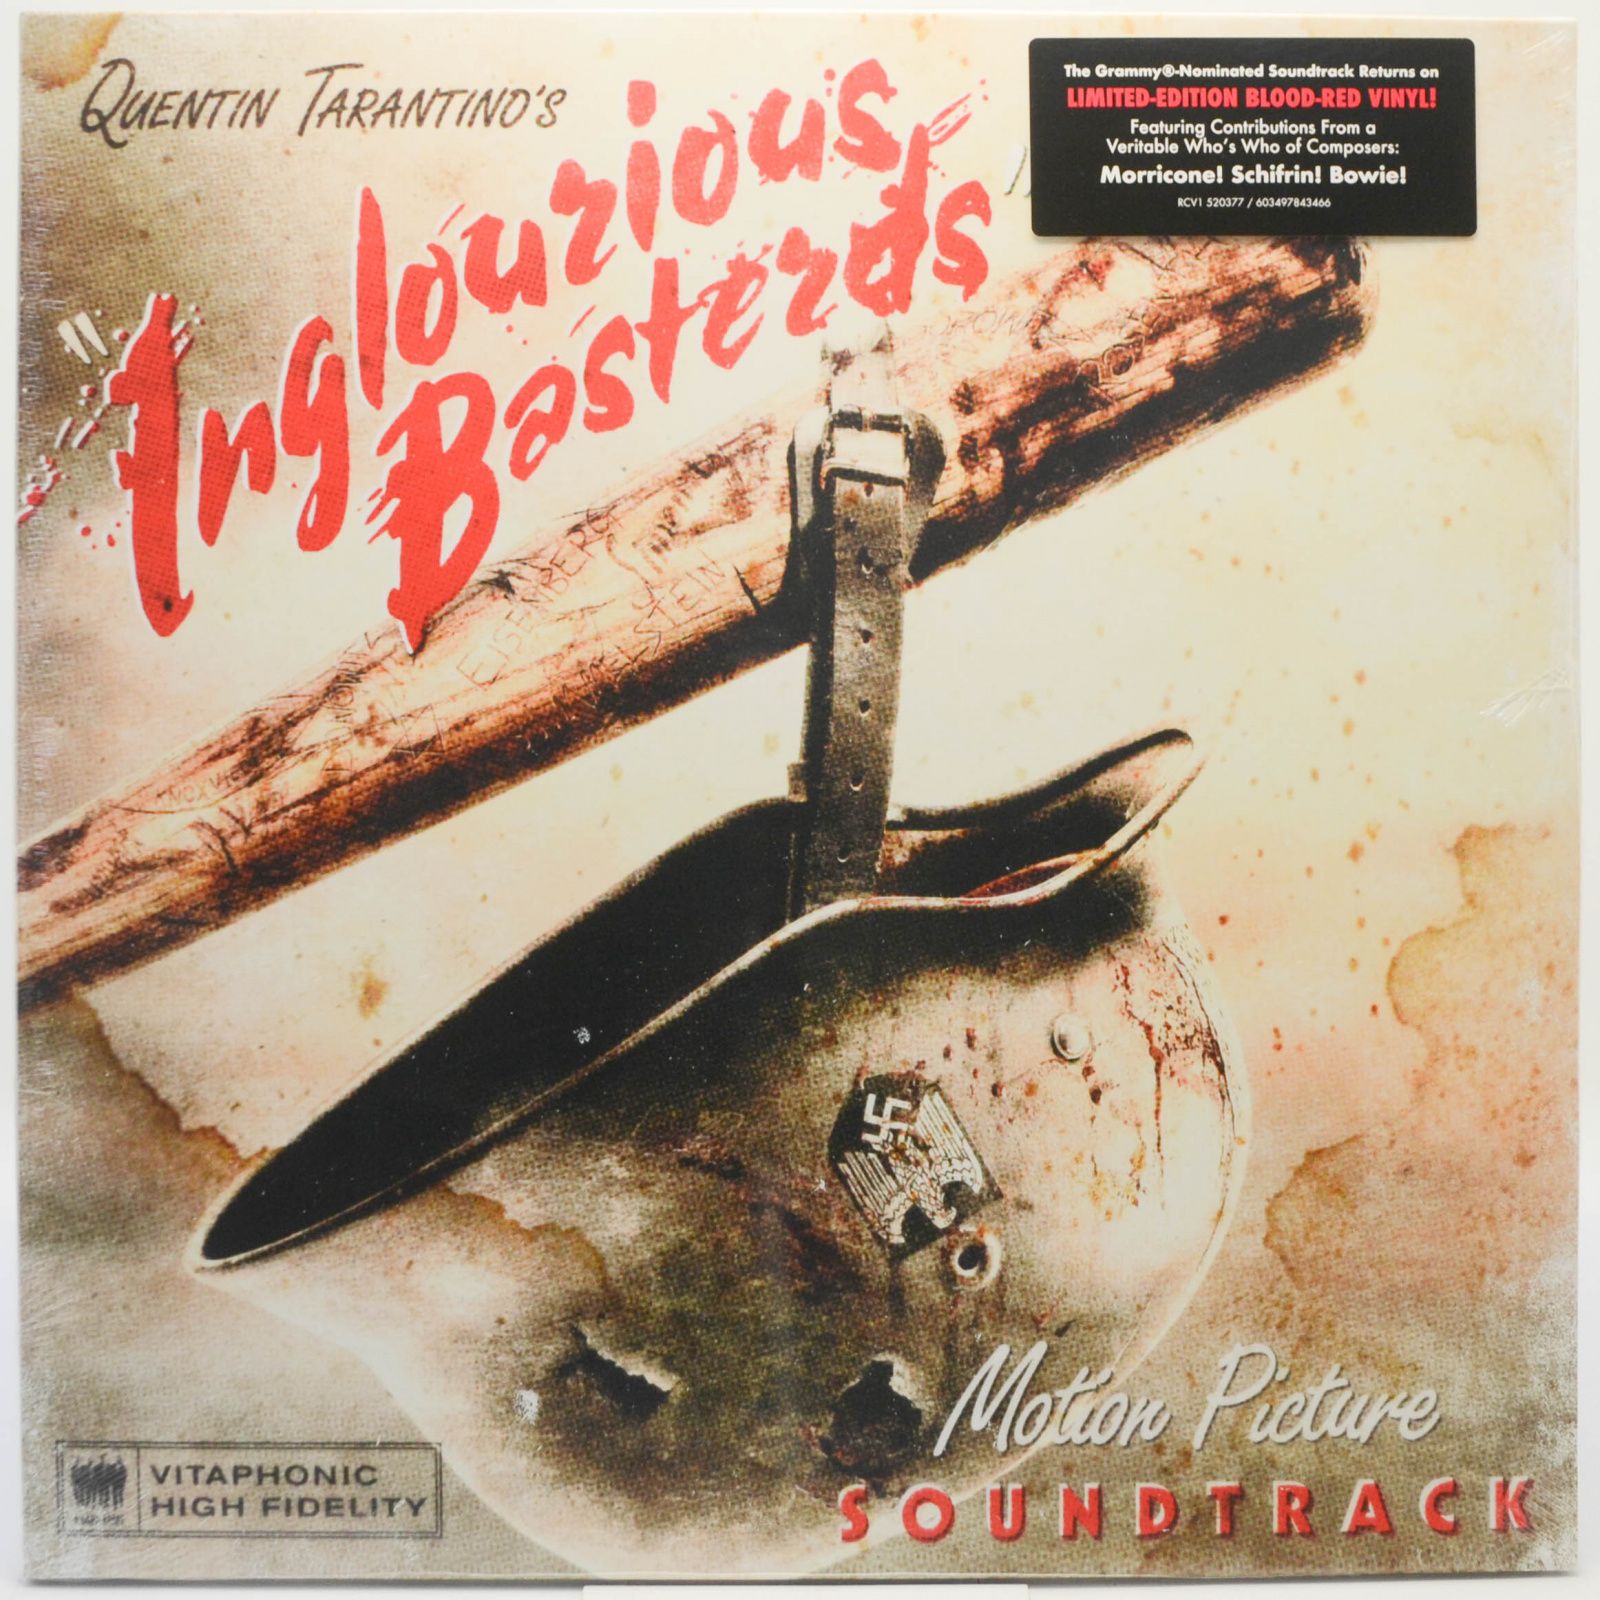 Various — Quentin Tarantino's Inglourious Basterds (Motion Picture Soundtrack), 2009